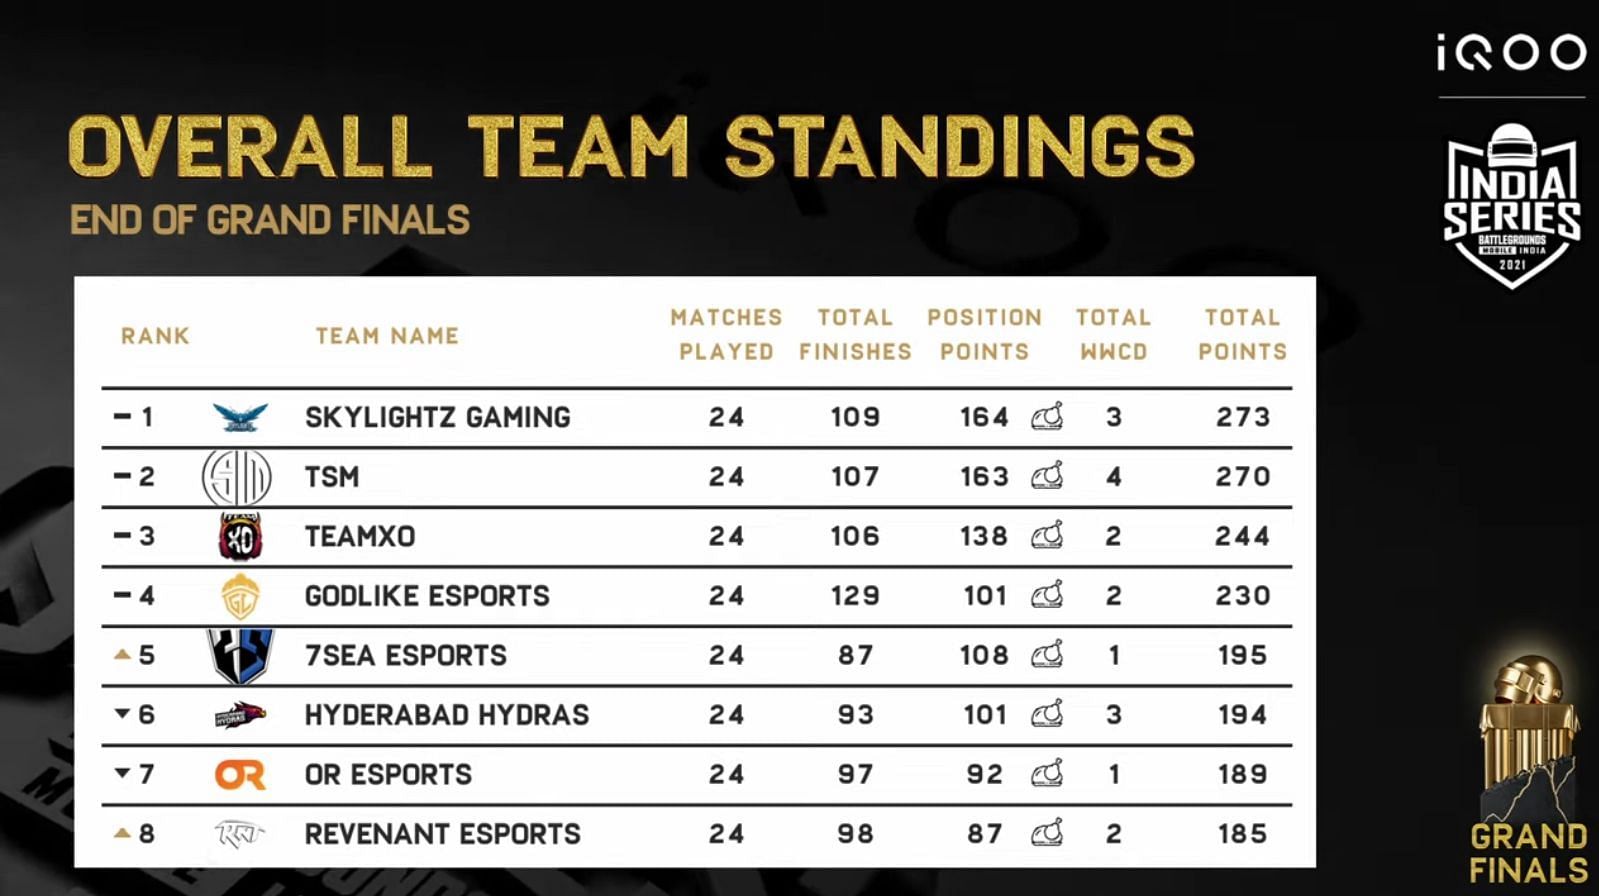 GodLike Esports reached 4th place in the Grand Finals